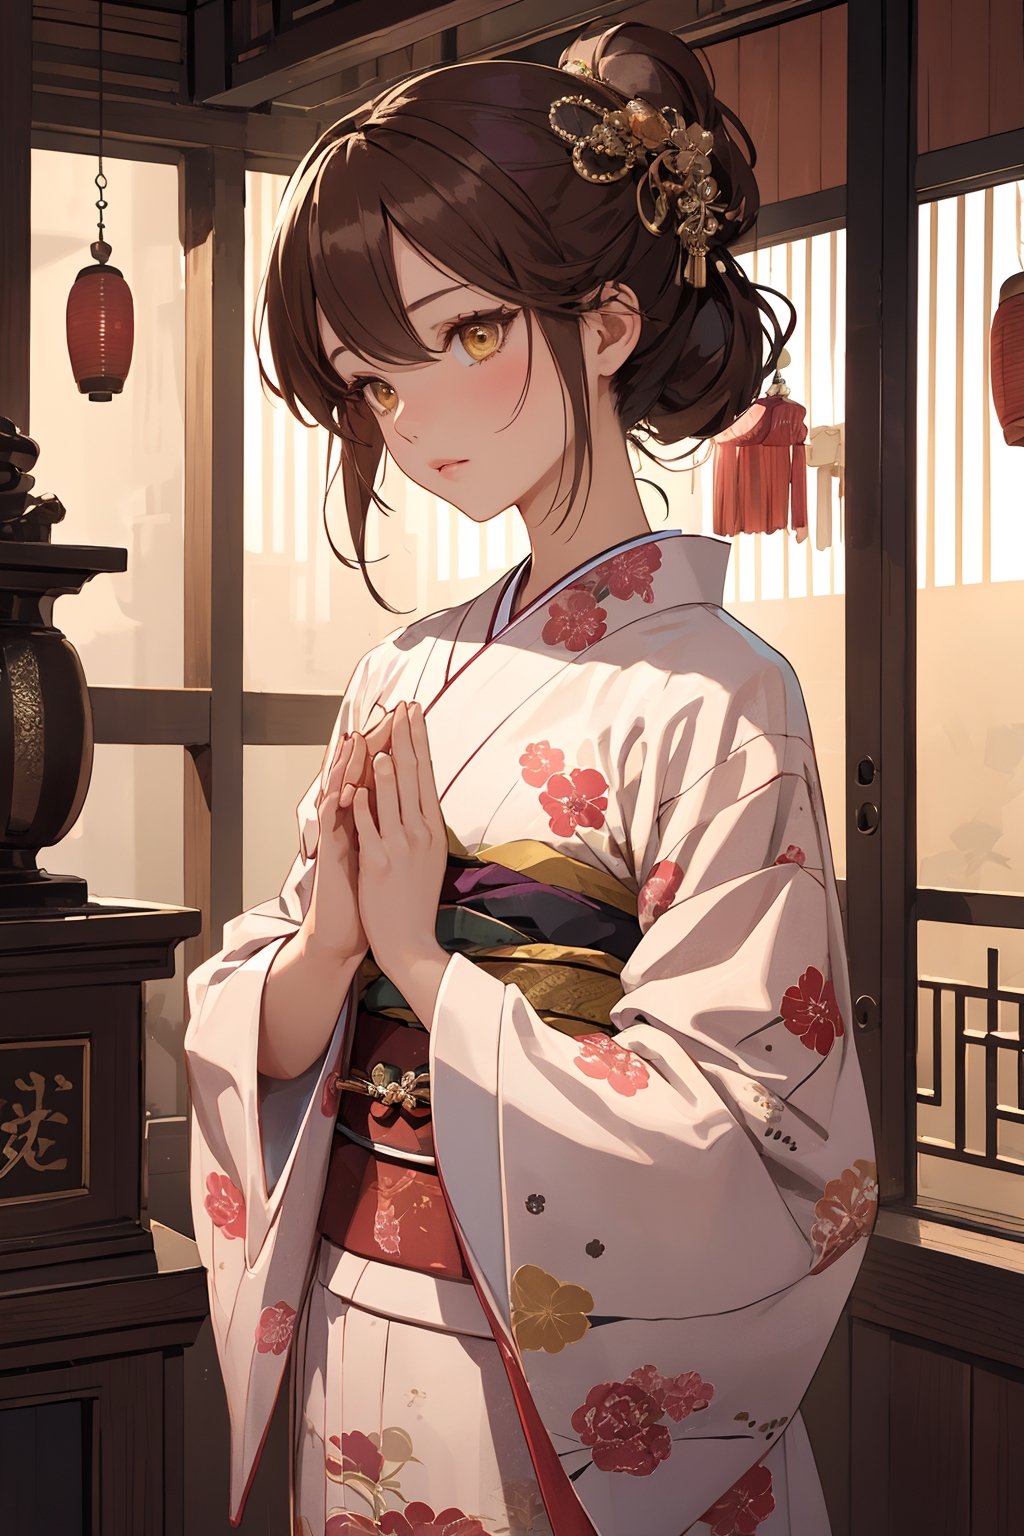 A Ultra realistic, a stunningly girl in (Pine and plum  pattern kimono:0.9), ornaments, flirting, filigree, colorful, sparkels, highlights, digital art, masterwork, brown hair, (pray with her palms together), at a shrine , amber eyes, chignon, bright theme, soothing tones, muted colors, high contrast, (natural skin texture, hyperrealism, soft light, sharp), 